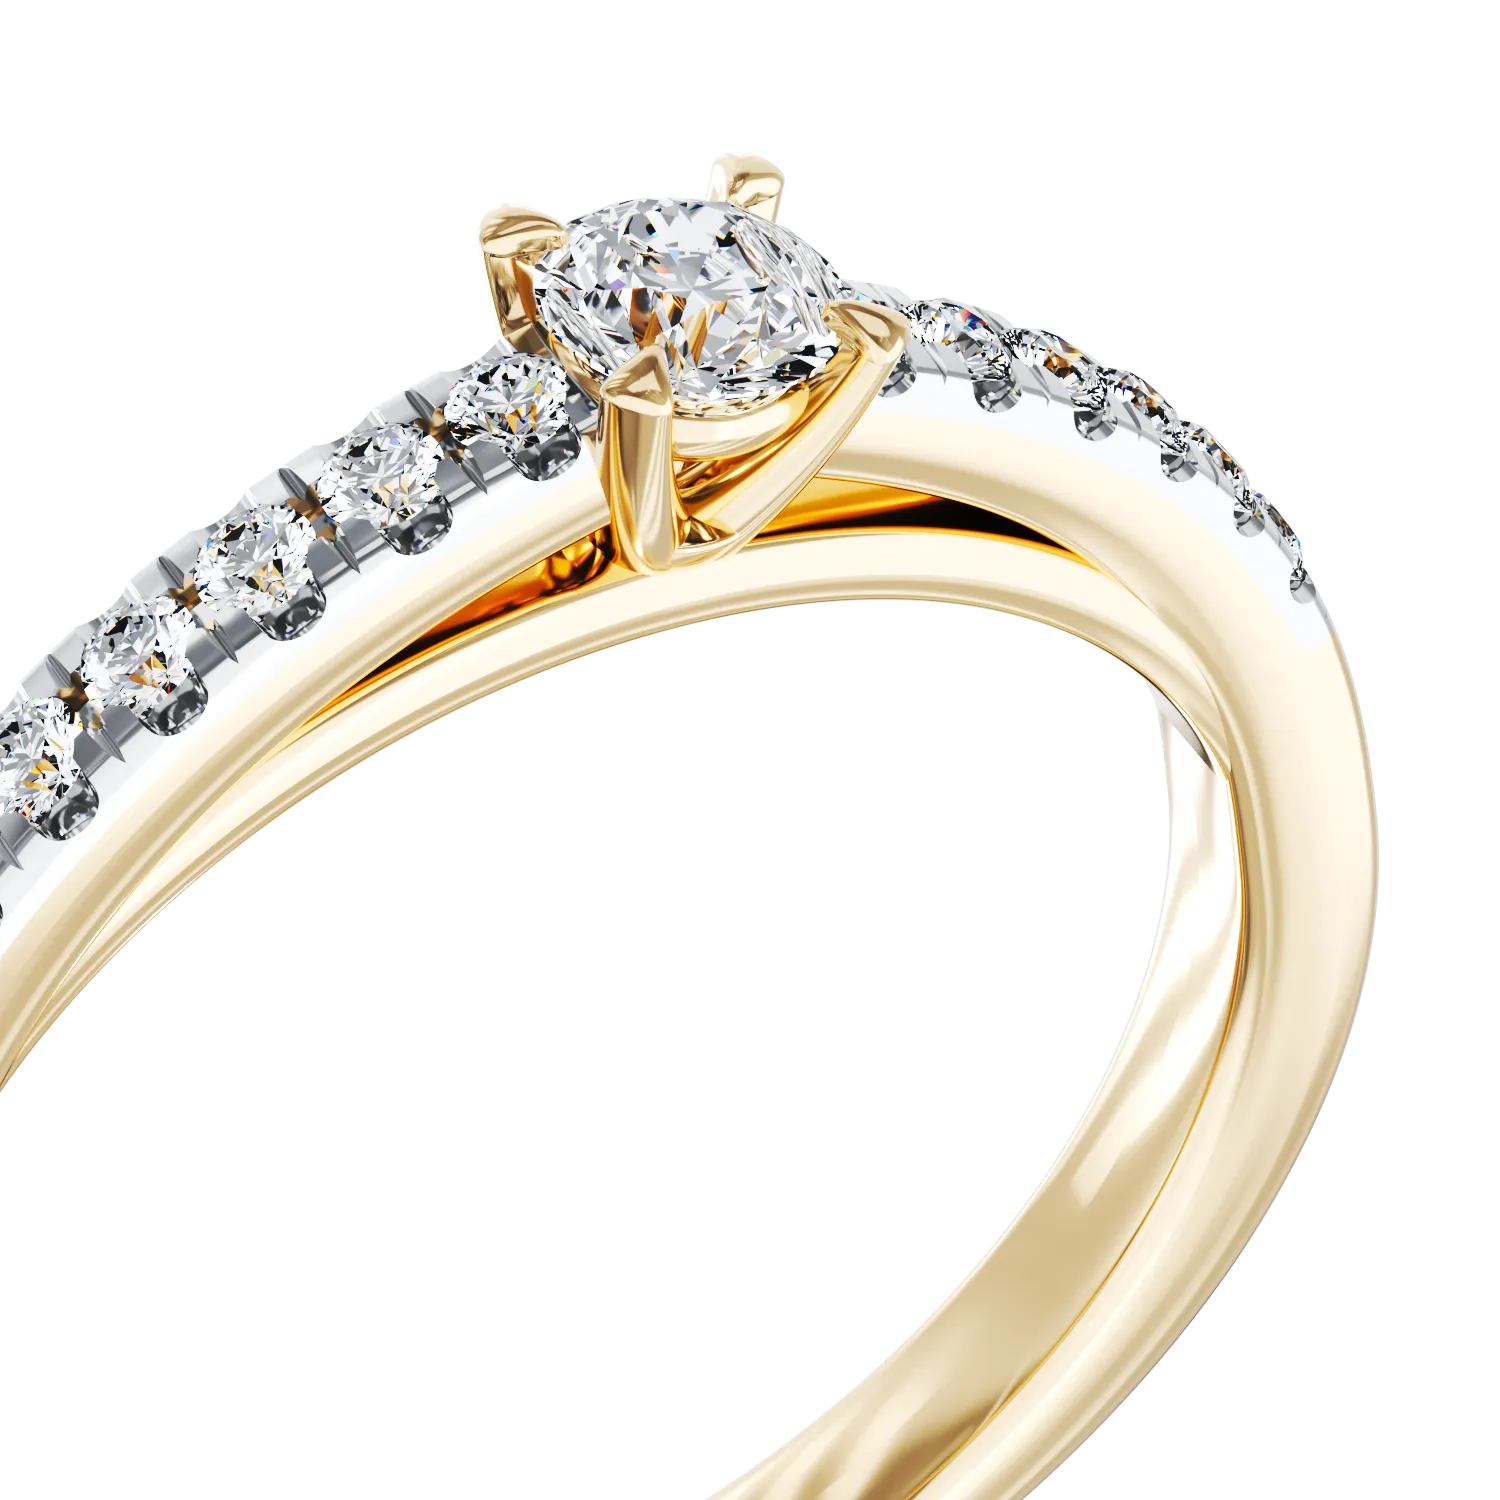 18K yellow gold engagement ring with 0.3ct diamond and 0.135ct diamonds